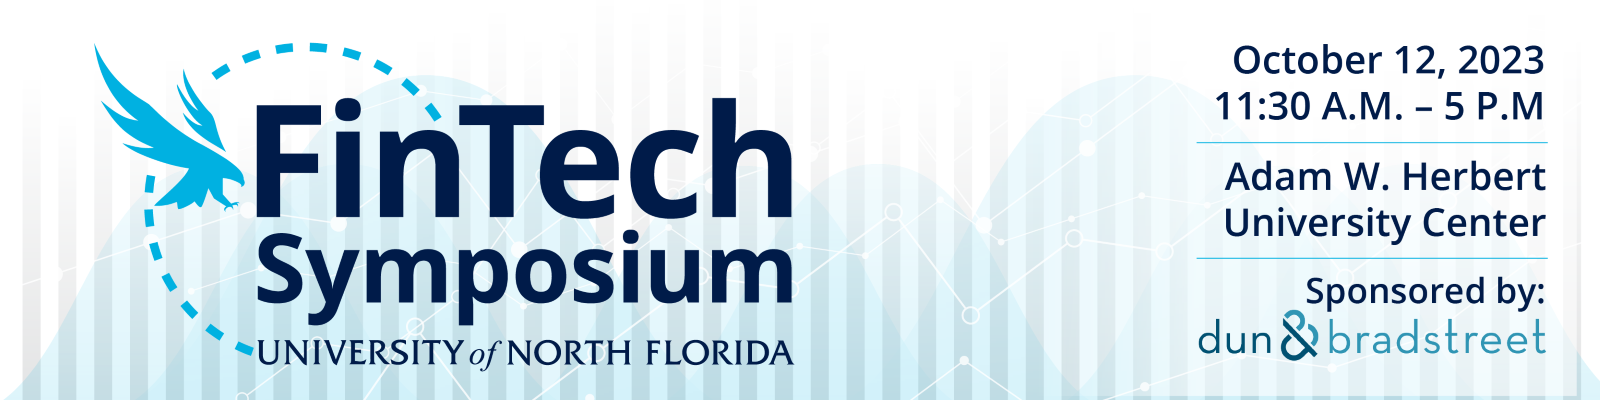 FinTech Symposium banner with date, location and sponsor